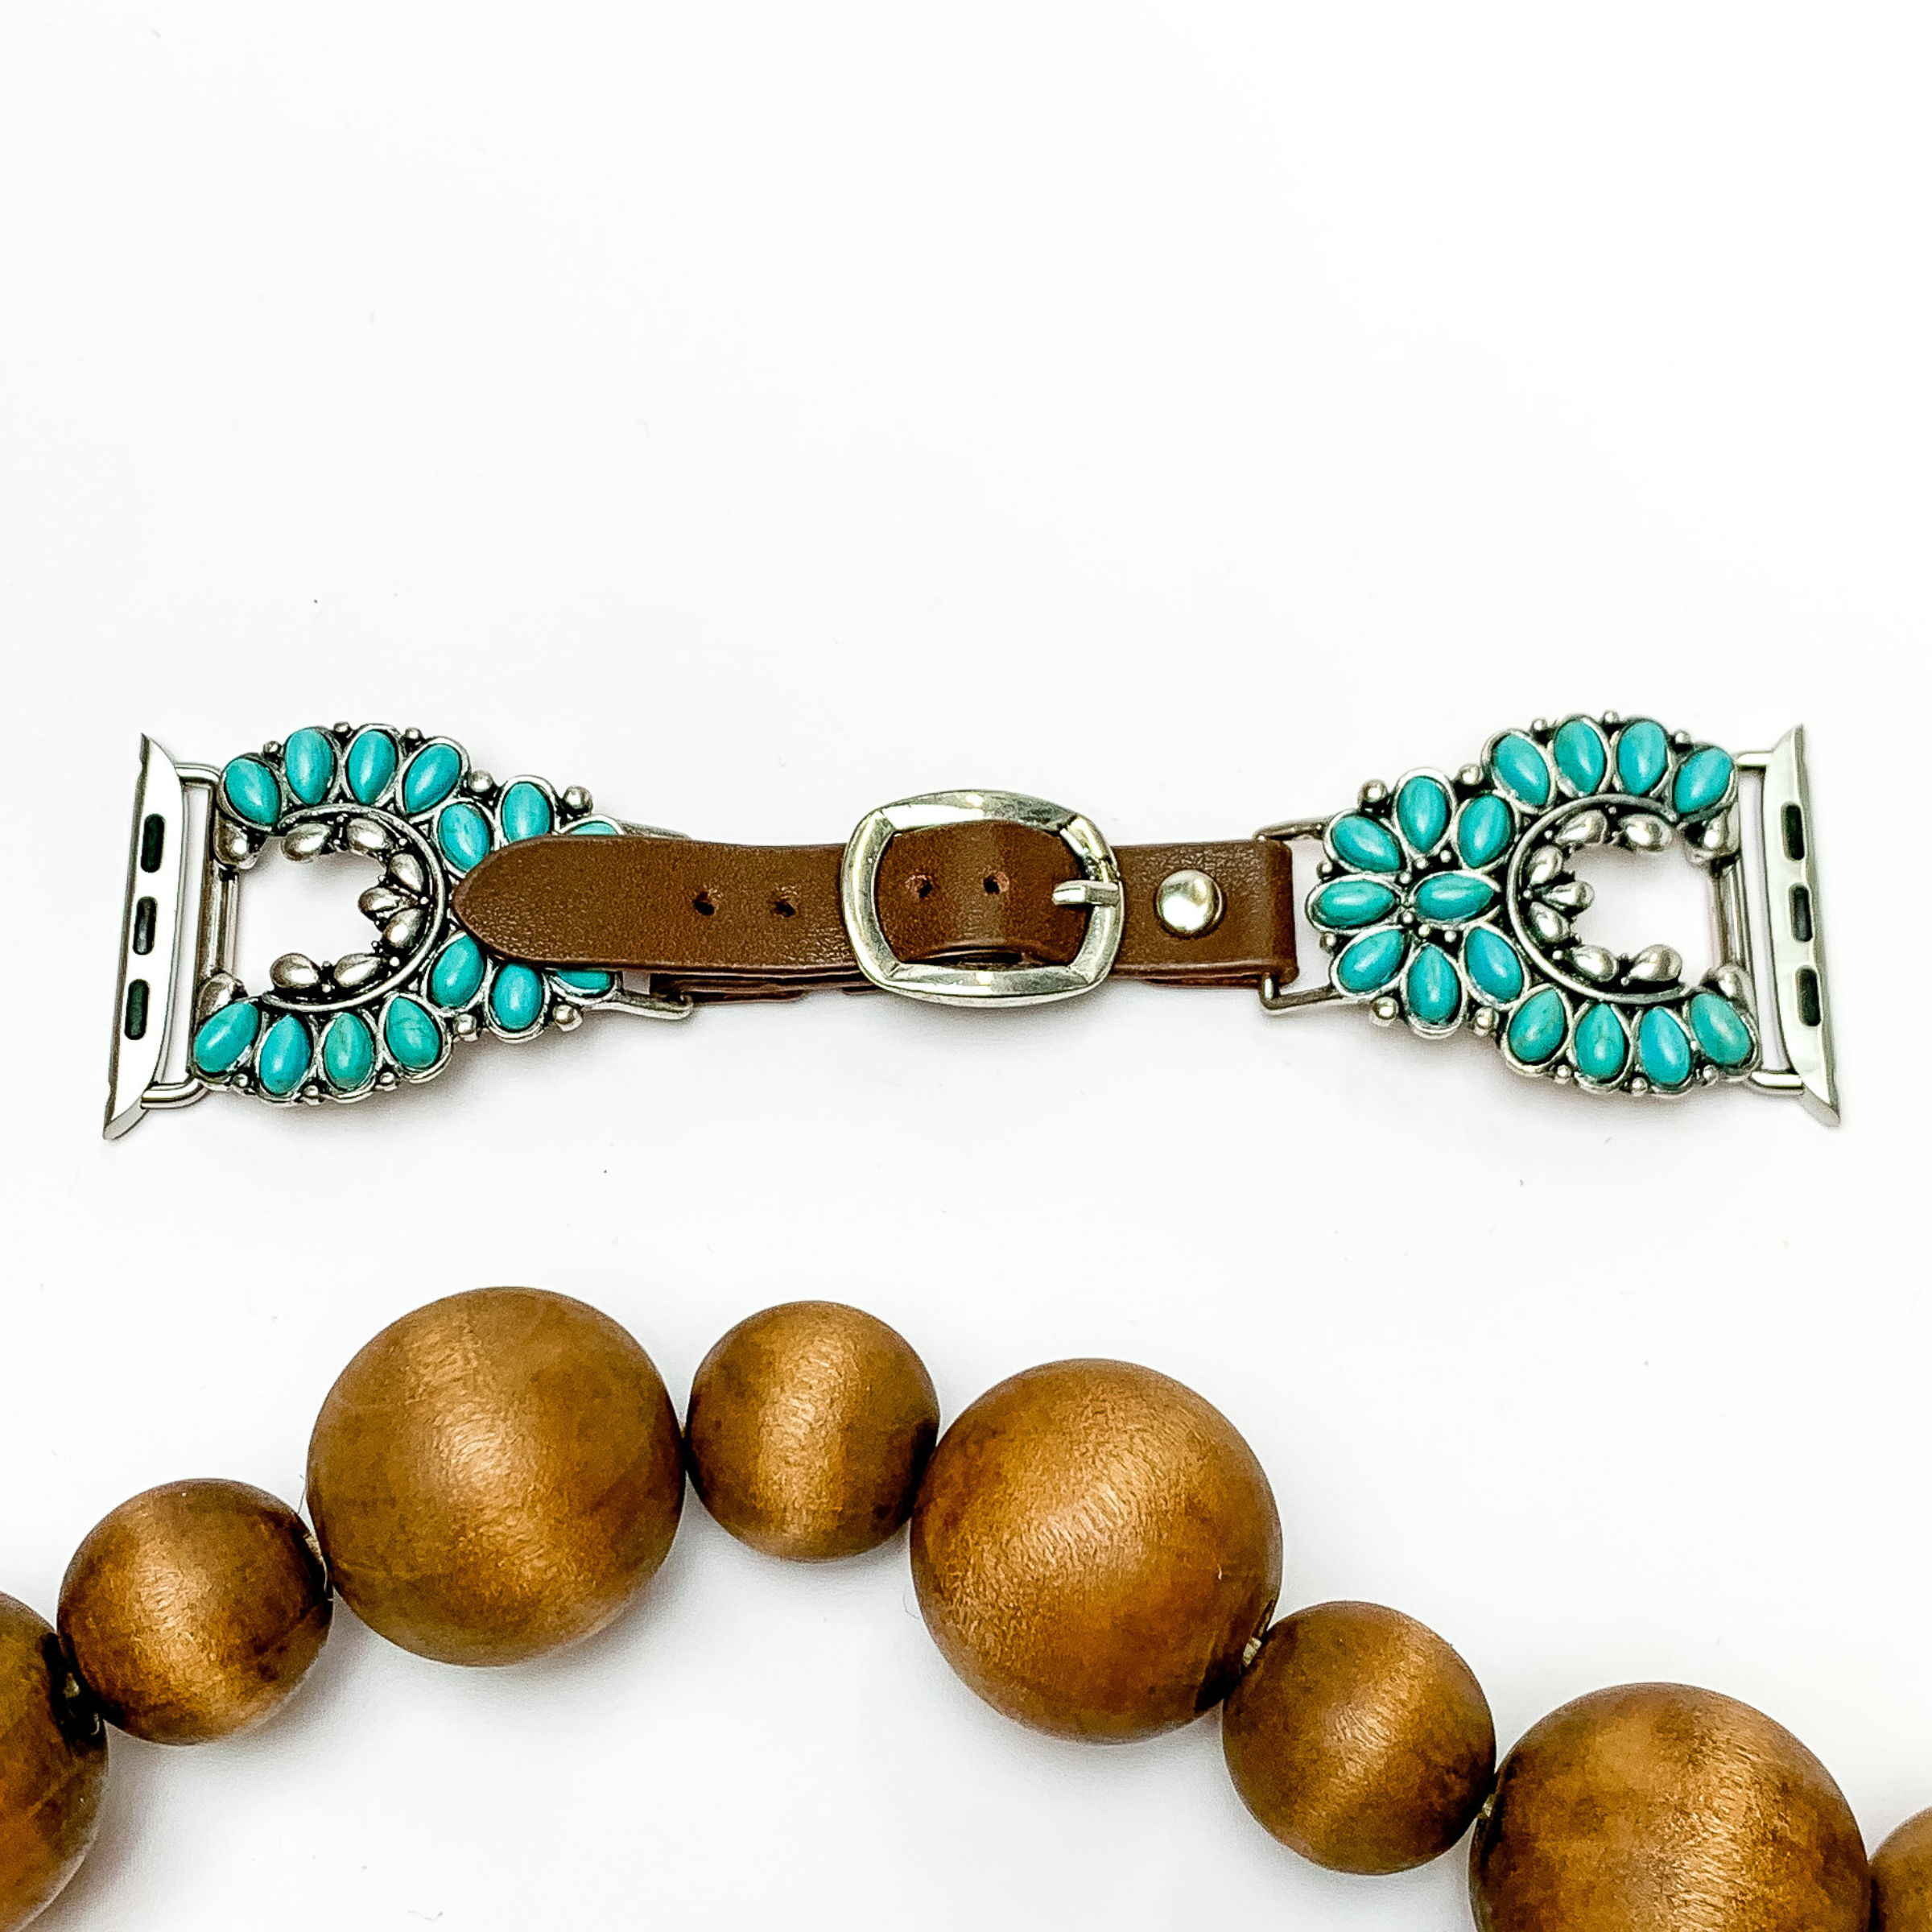 Dark Brown watch band with silver, naja ends and turquoise stones with Apple watch band acessories. This watch band is pictured on a white background with brown beads underneath the band. 